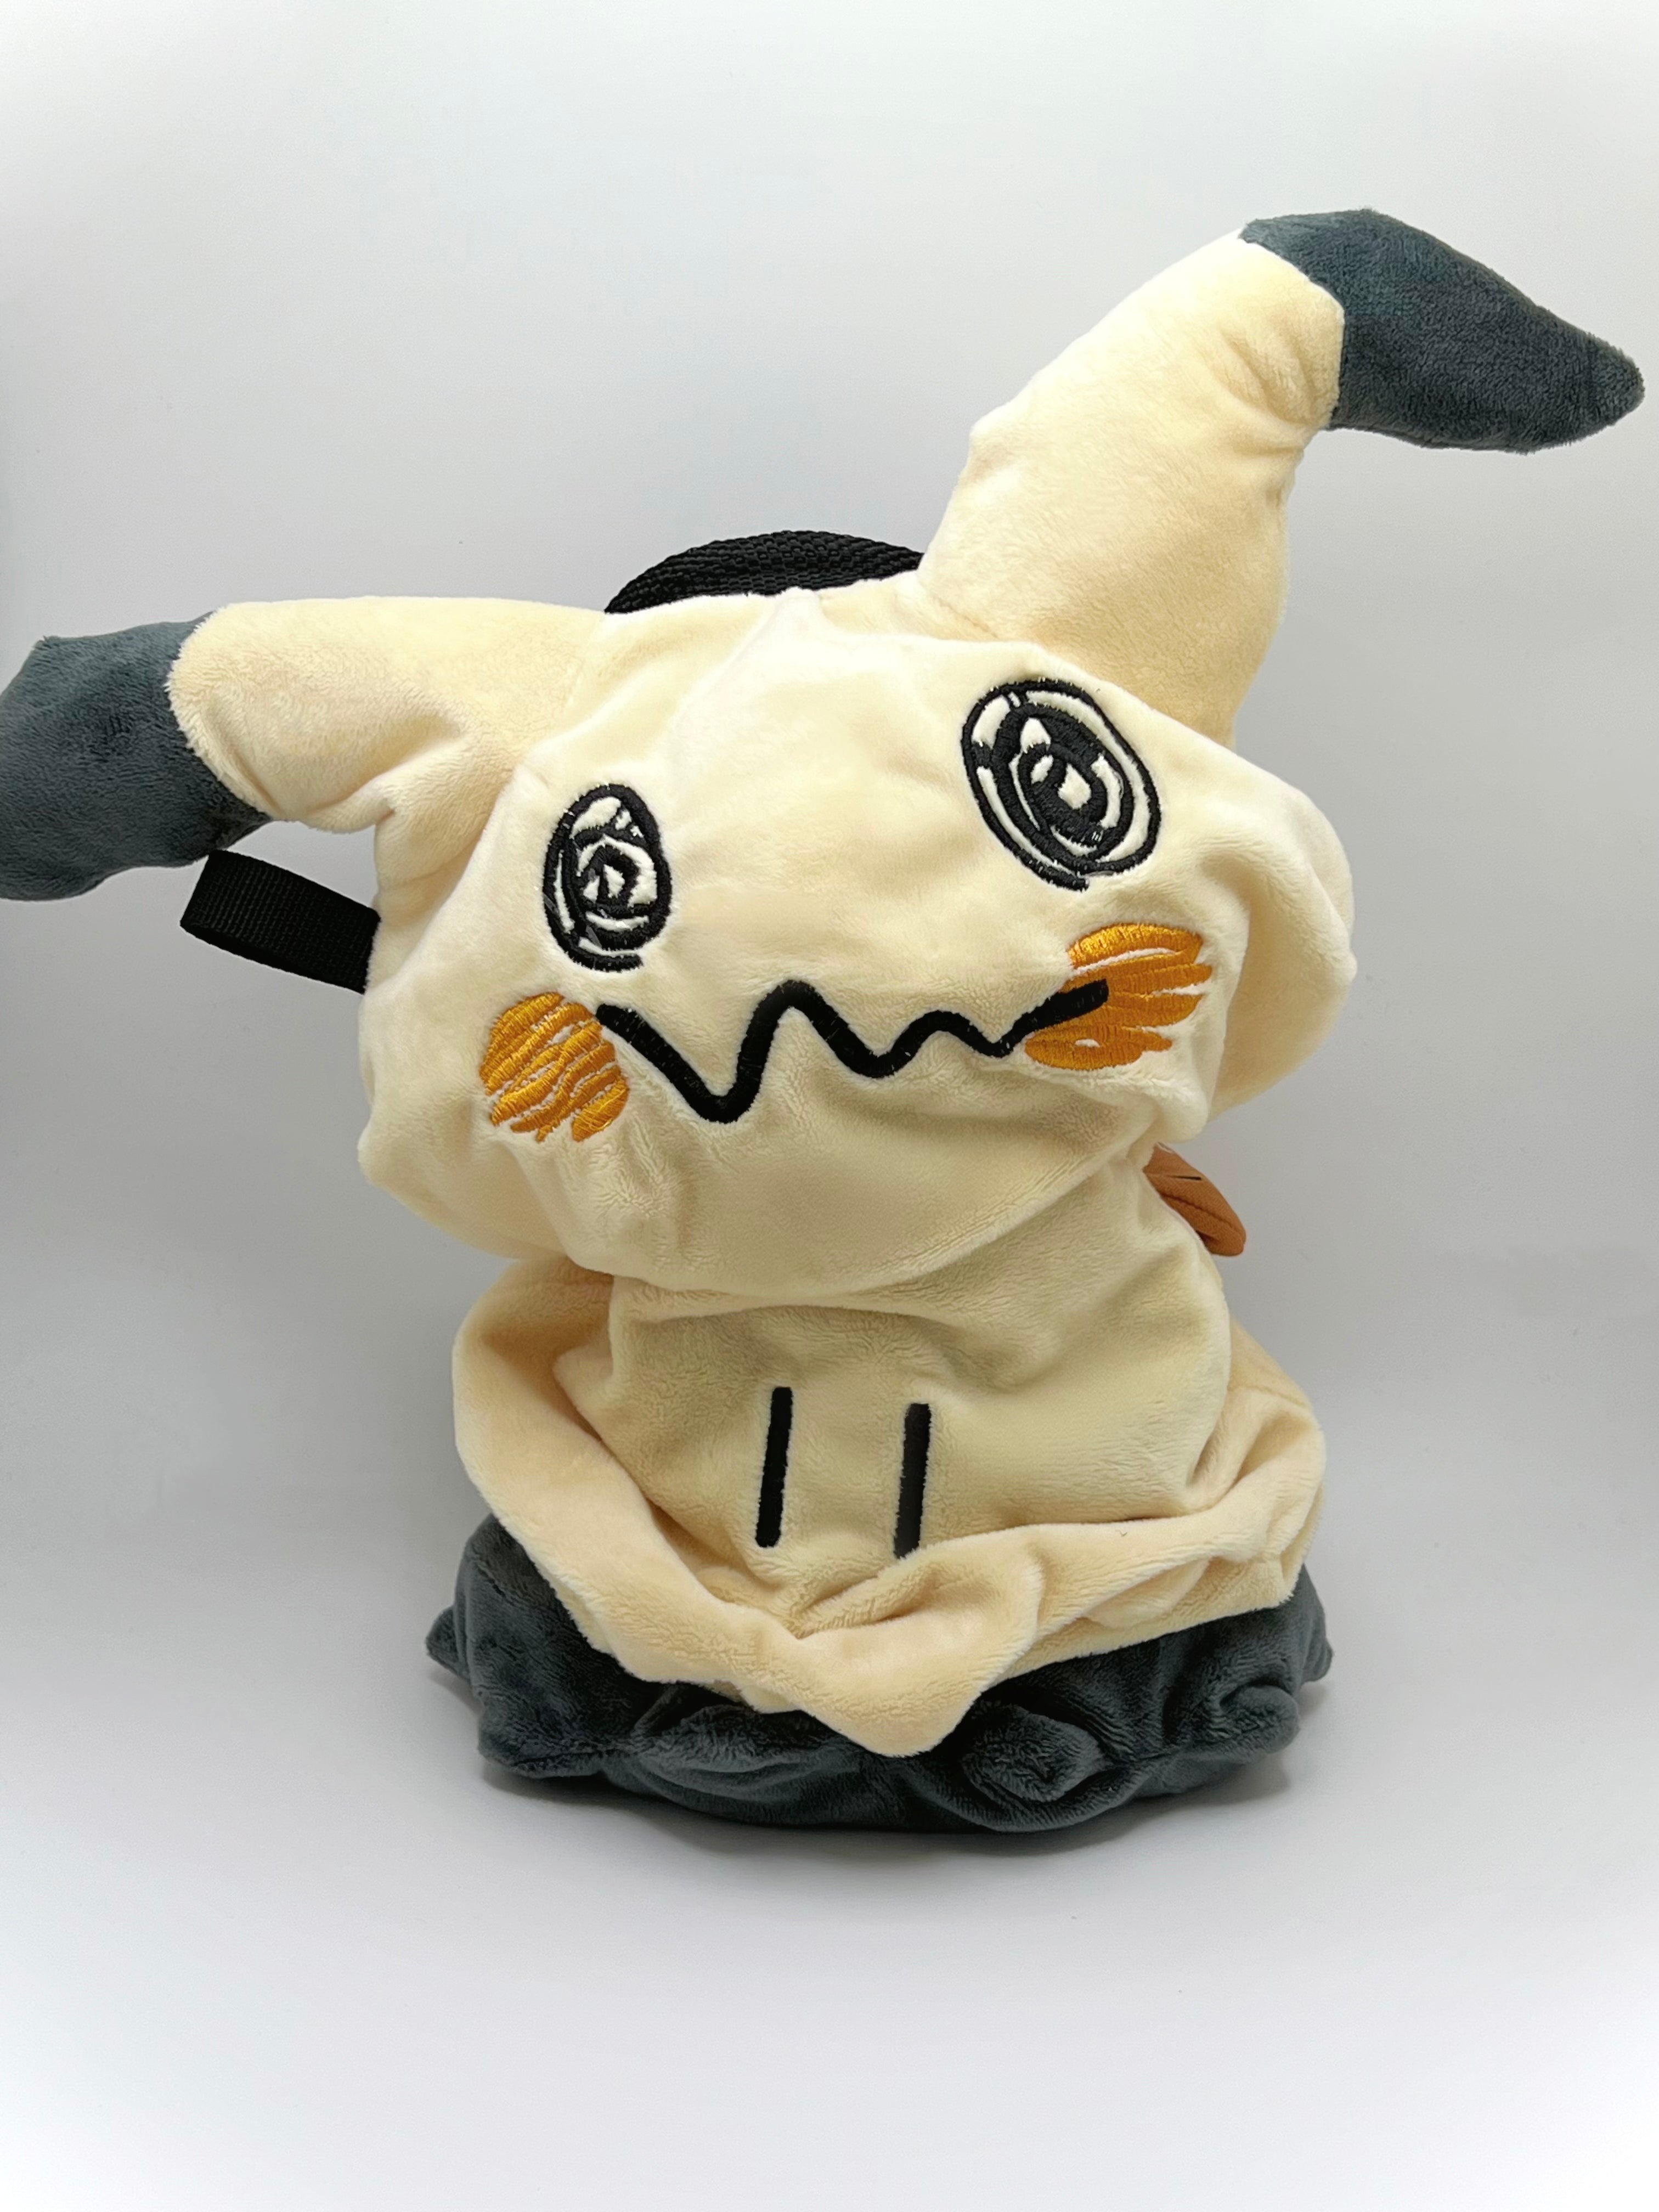 Mimikyu is not yet available in Pokemon GO